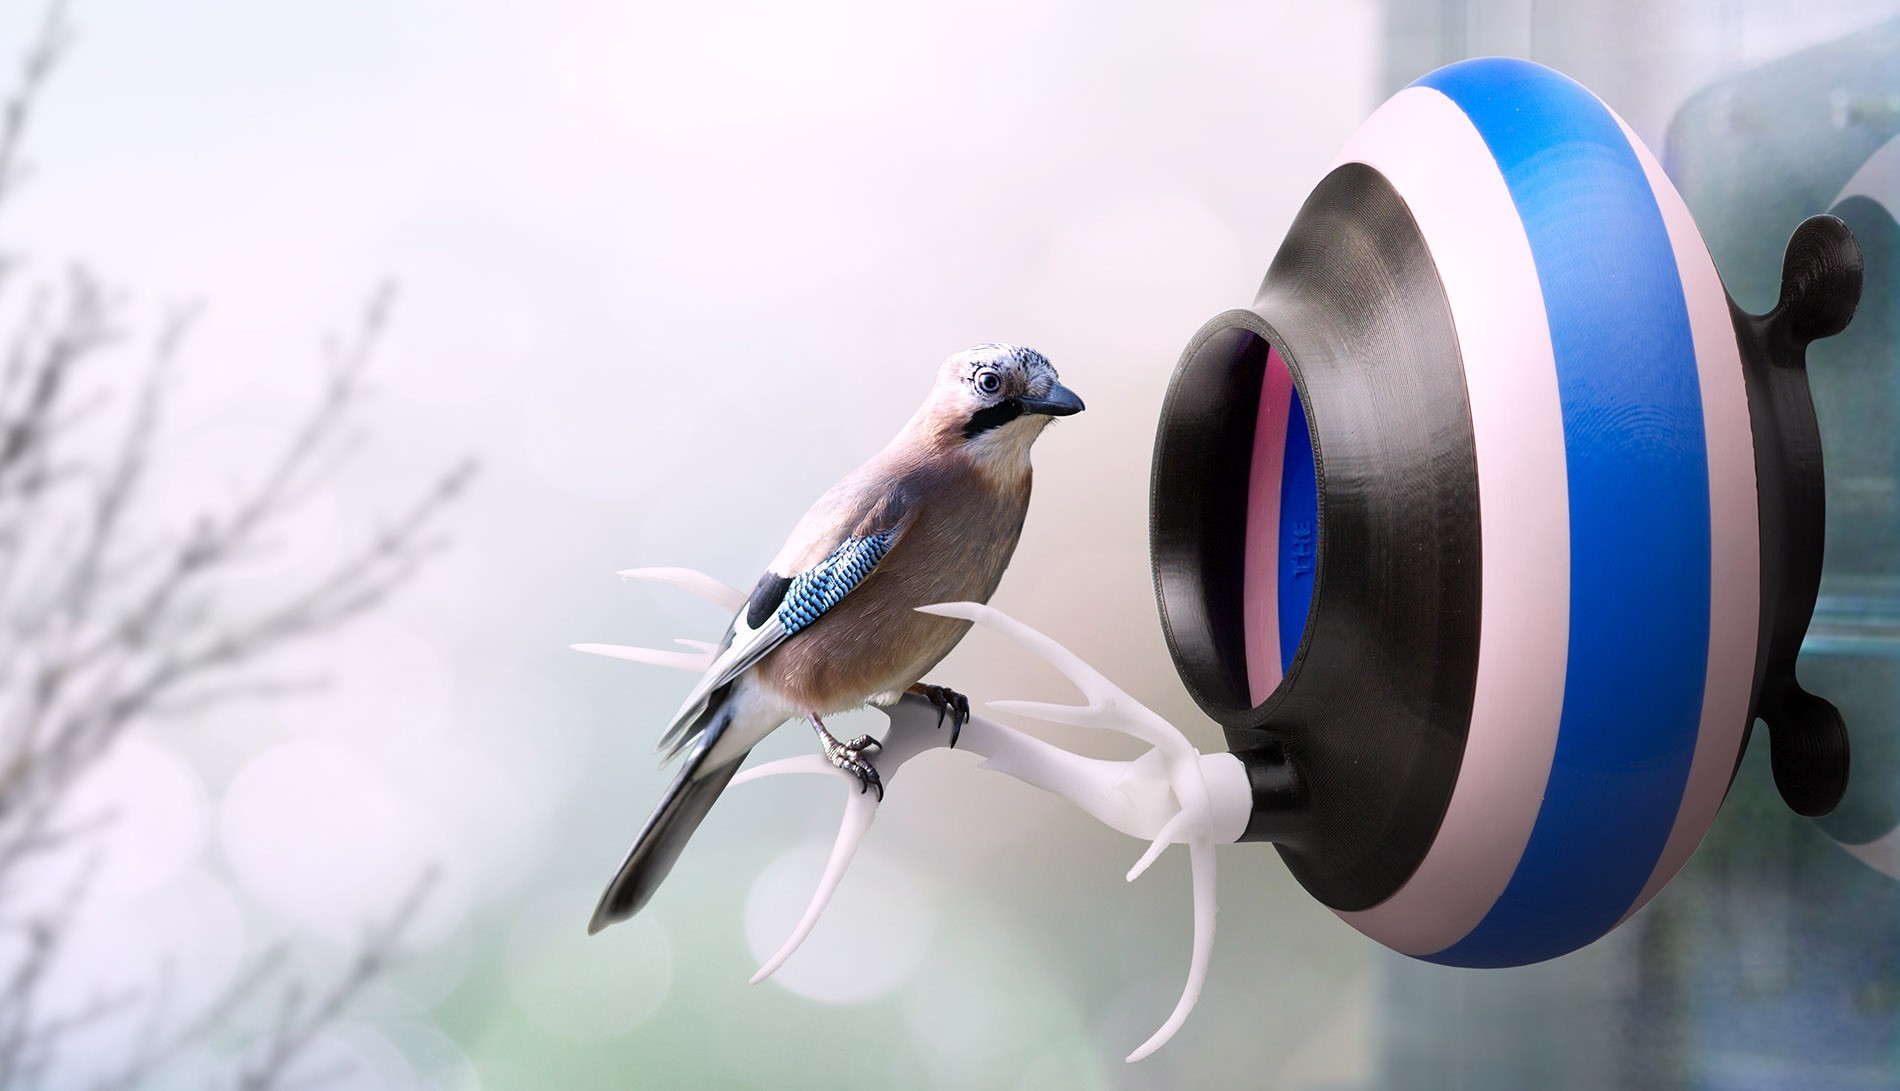 It lets everyone make their own bird feeders by means of 3D printing.